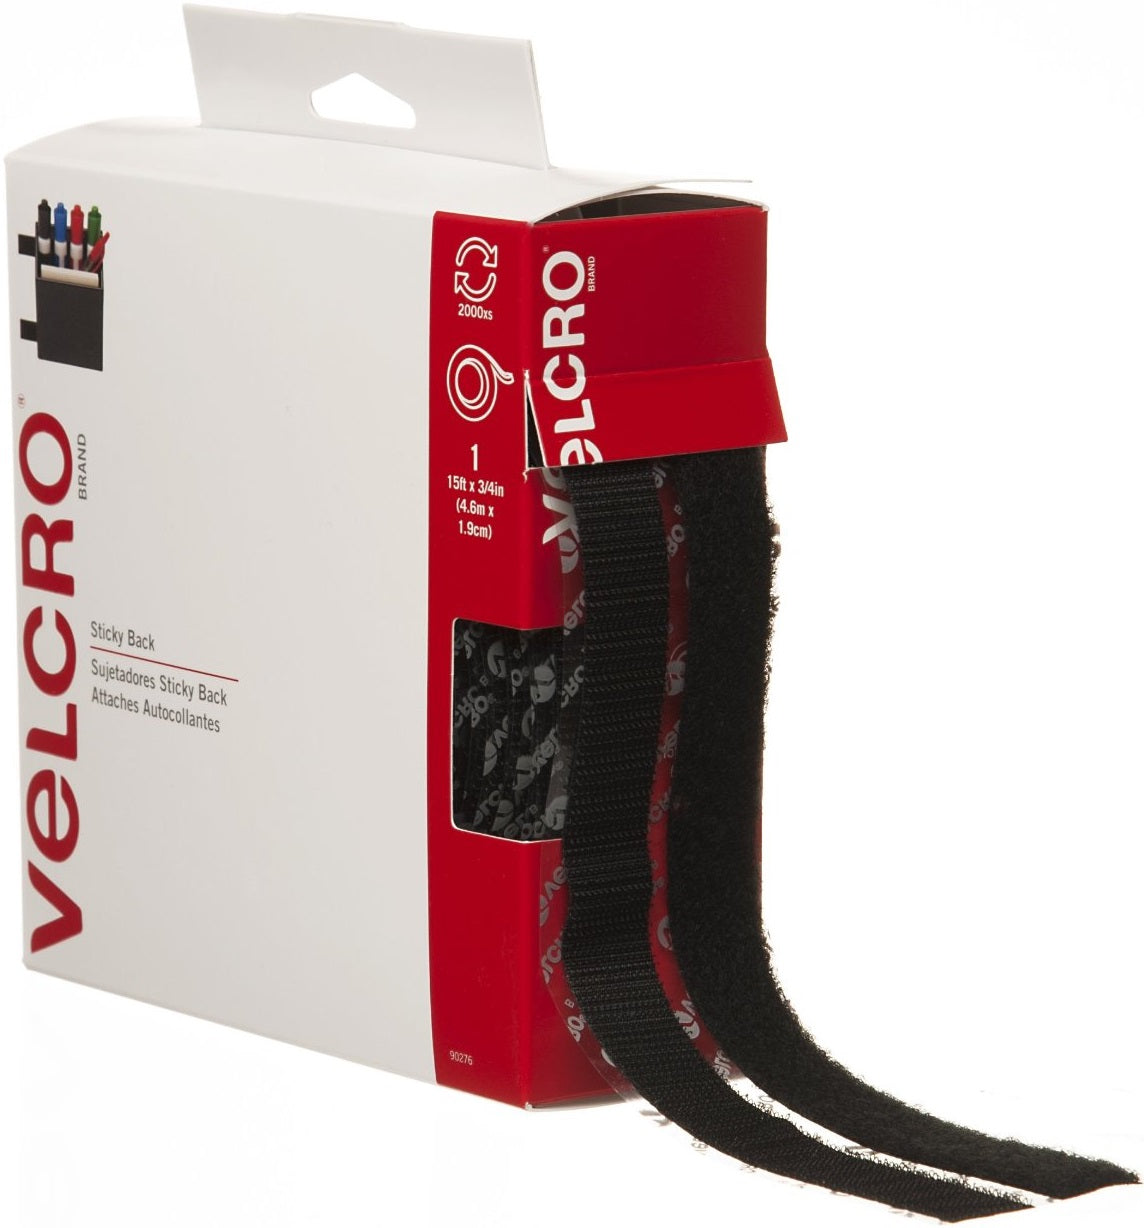 buy velcro & hanging hardware at cheap rate in bulk. wholesale & retail builders hardware items store. home décor ideas, maintenance, repair replacement parts